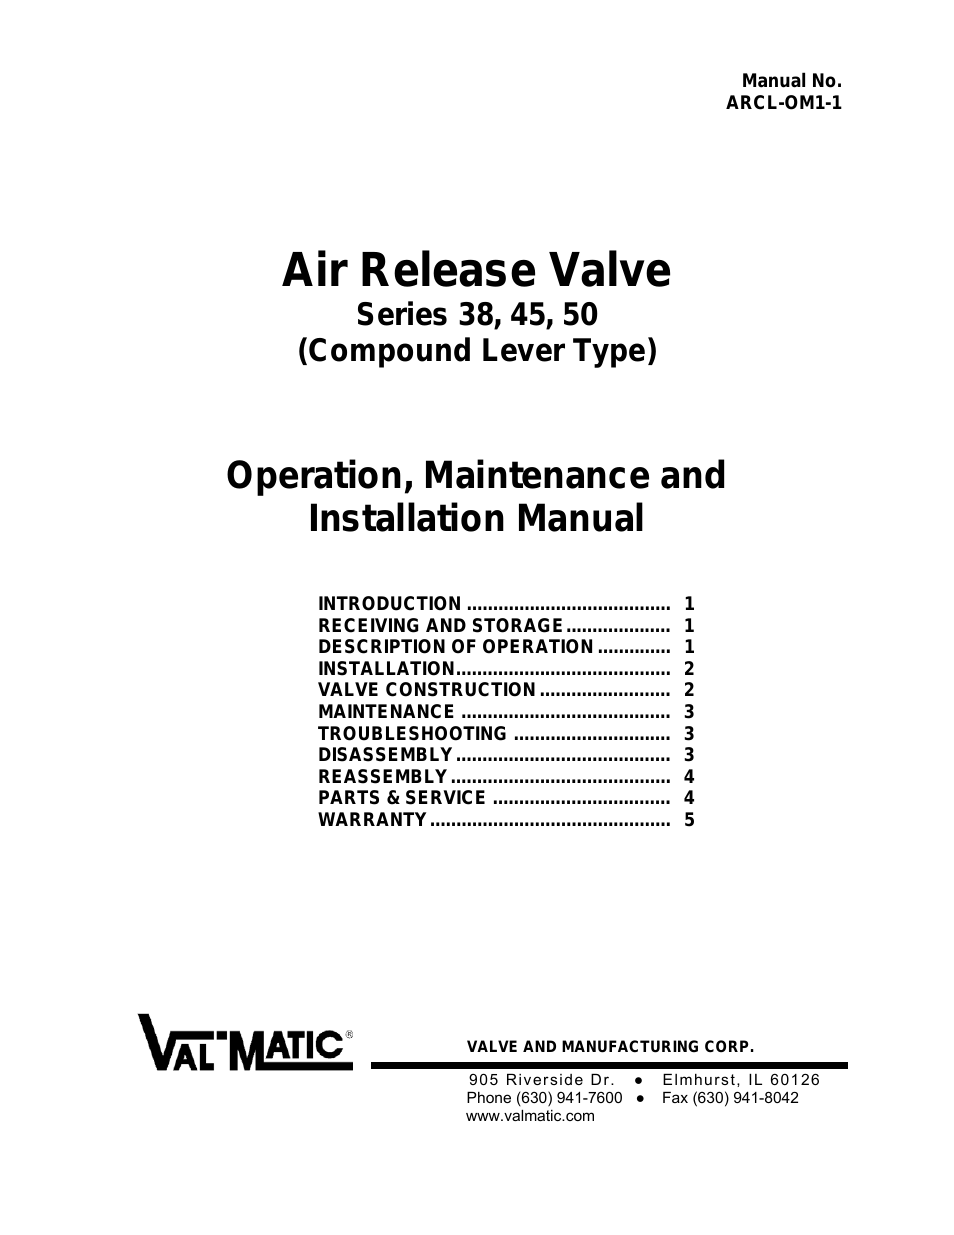 45 Series Air Release Valve (Compound Lever Type)